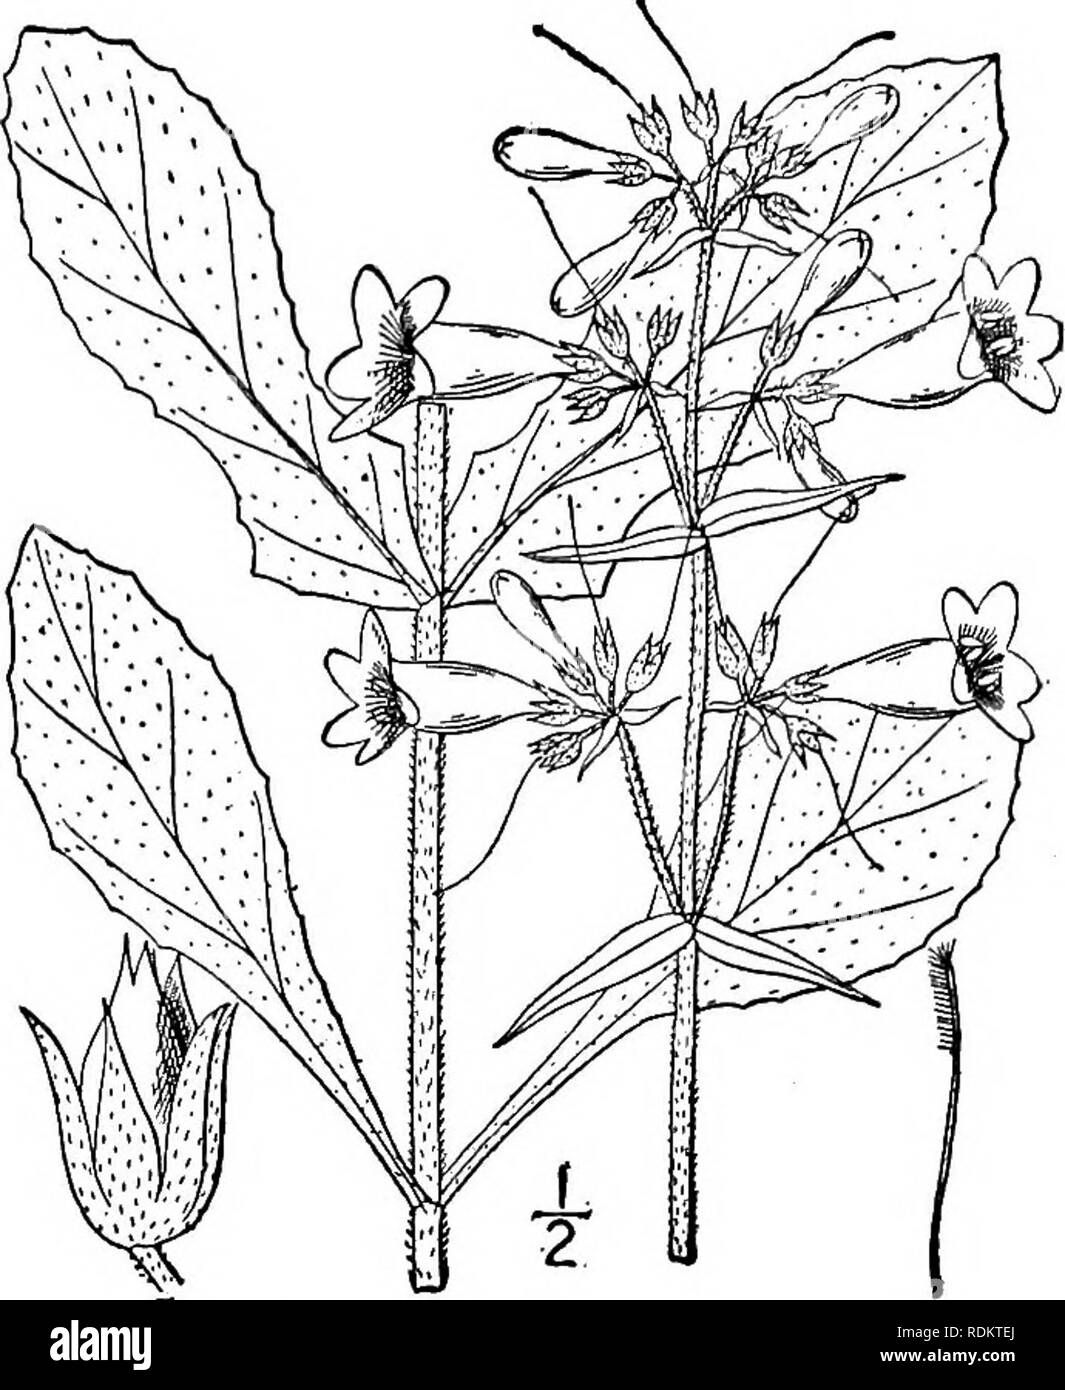 . An illustrated flora of the northern United States, Canada and the British possessions, from Newfoundland to the parallel of the southern boundary of Virginia, and from the Atlantic Ocean westward to the 102d meridian. Botany; Botany. Genus 9. •FIGWORT FAMILY. i33 2. Pentstemon canescens Britton. Gray Beard-tongue. Fig. 3756. Pentstemon laevigatas var. canescens Britton, Mem. Torr. Club 2: 30. 1890. P. canescens Britton, Mem. Torr. Club 5: 291. 1894. Densely and finely canescent or puberulent, or the leaves sometimes nearly glabrous; stem rather stout, i°-3° high. Leaves denticulate, the low Stock Photo